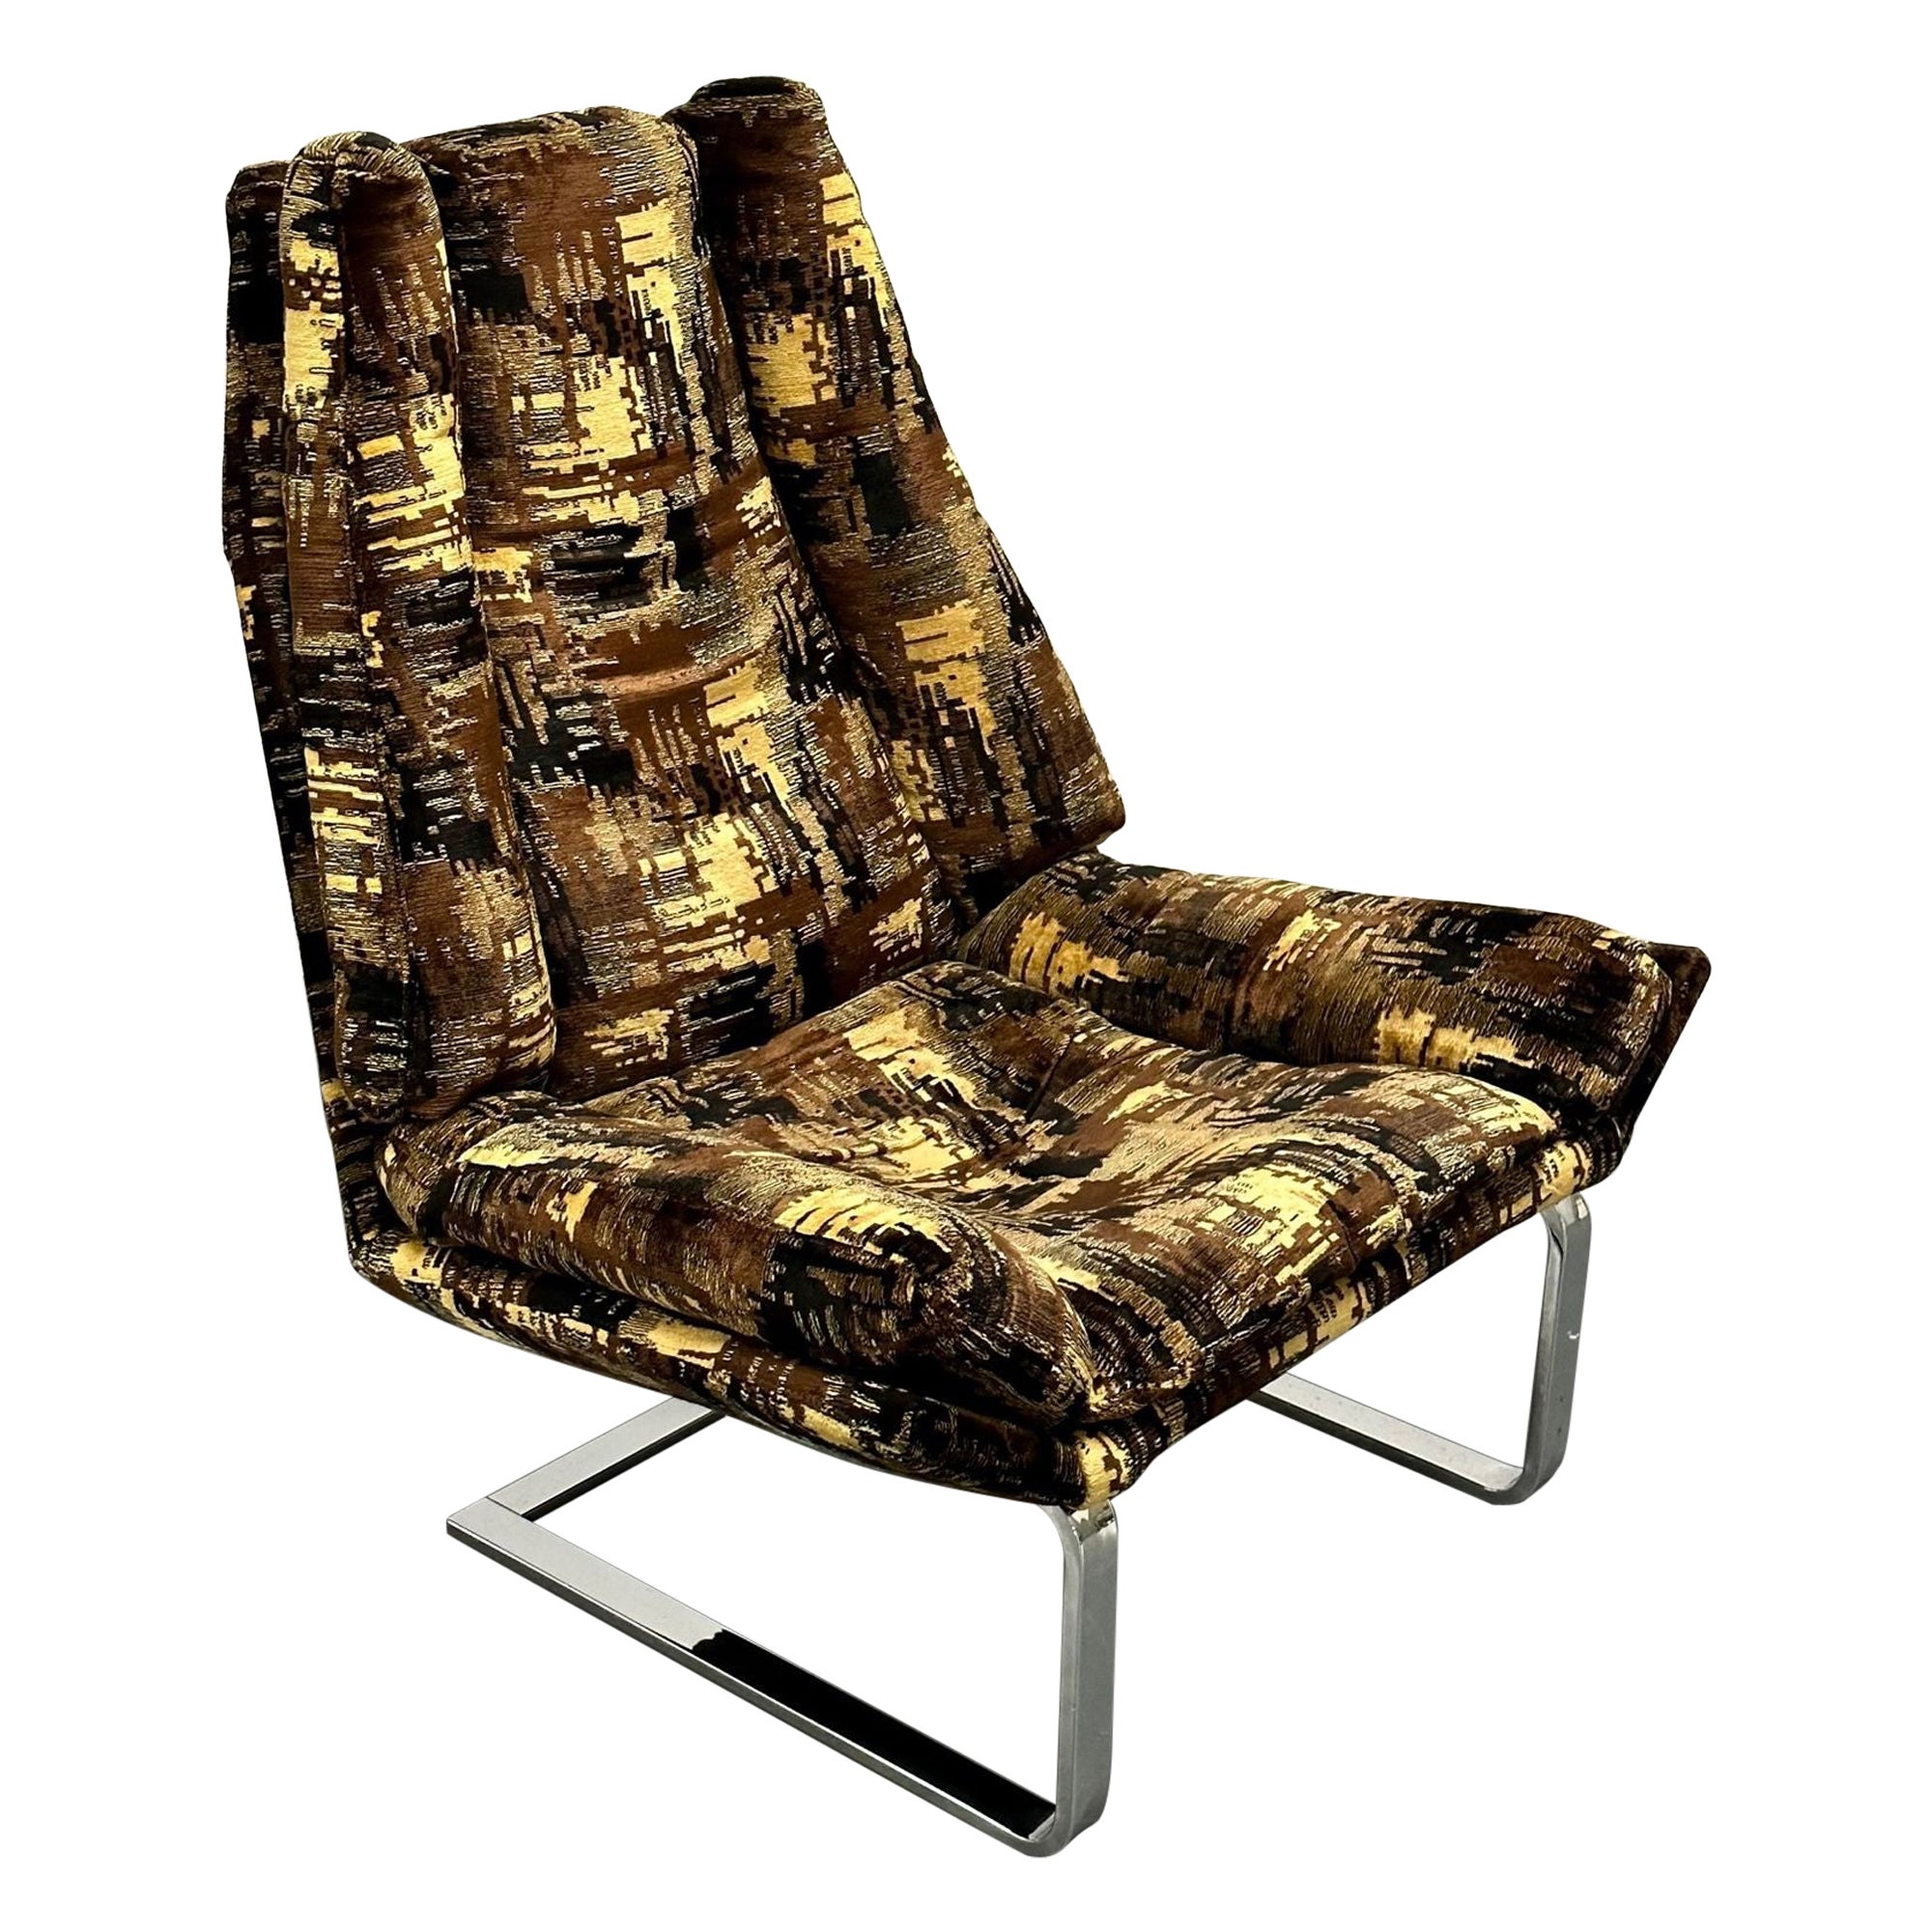 Mid-Century Modern Lounge Chair, Adrian Pearsall Style, American, Chrome, 1950s